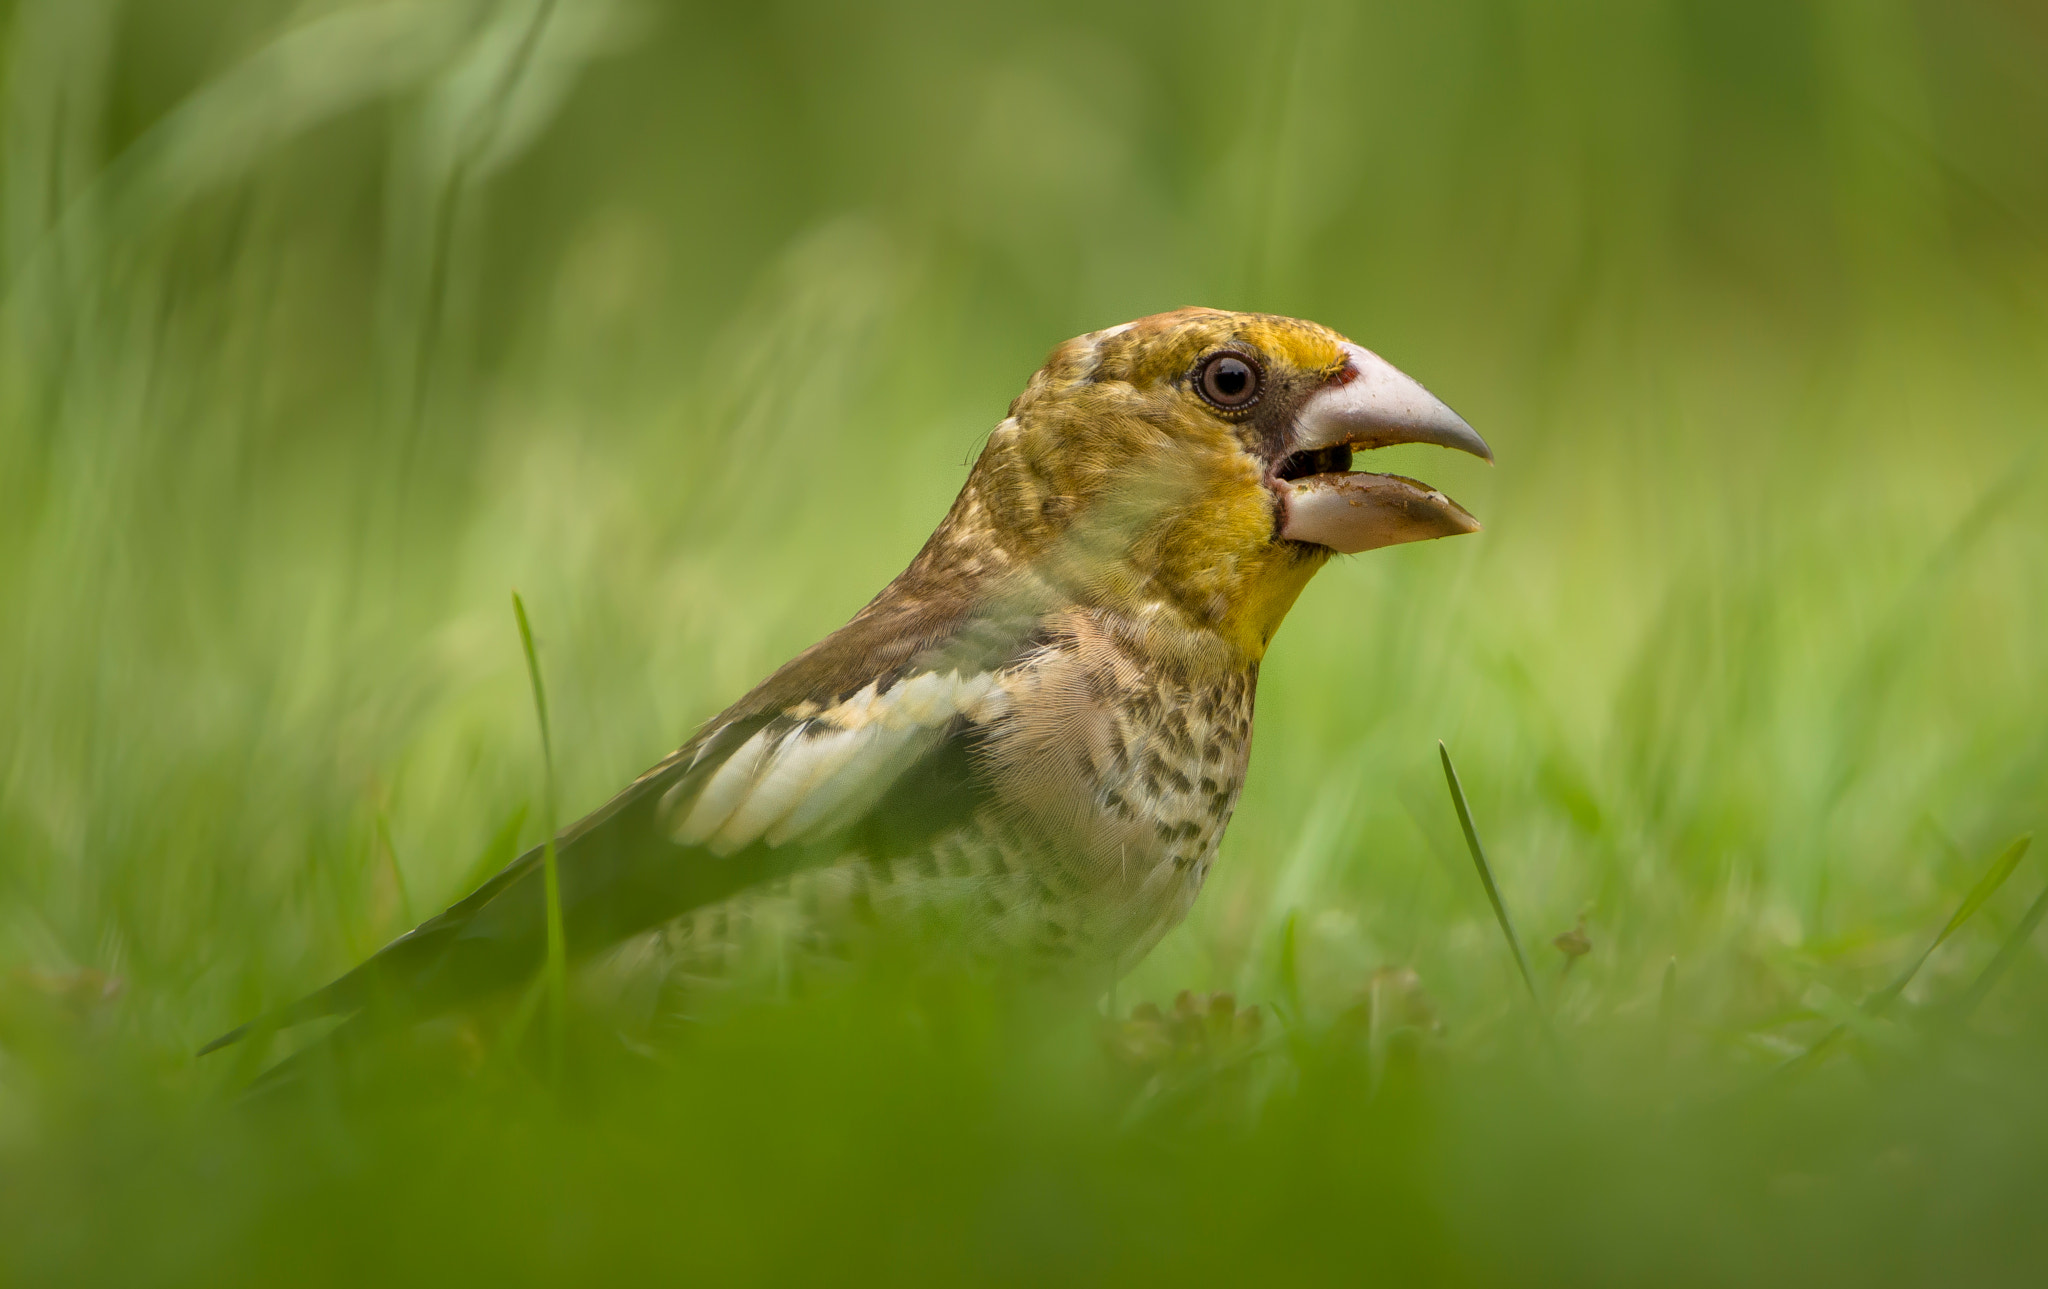 Nikon D5100 + Sigma 150-600mm F5-6.3 DG OS HSM | C sample photo. Young hawfinch photography